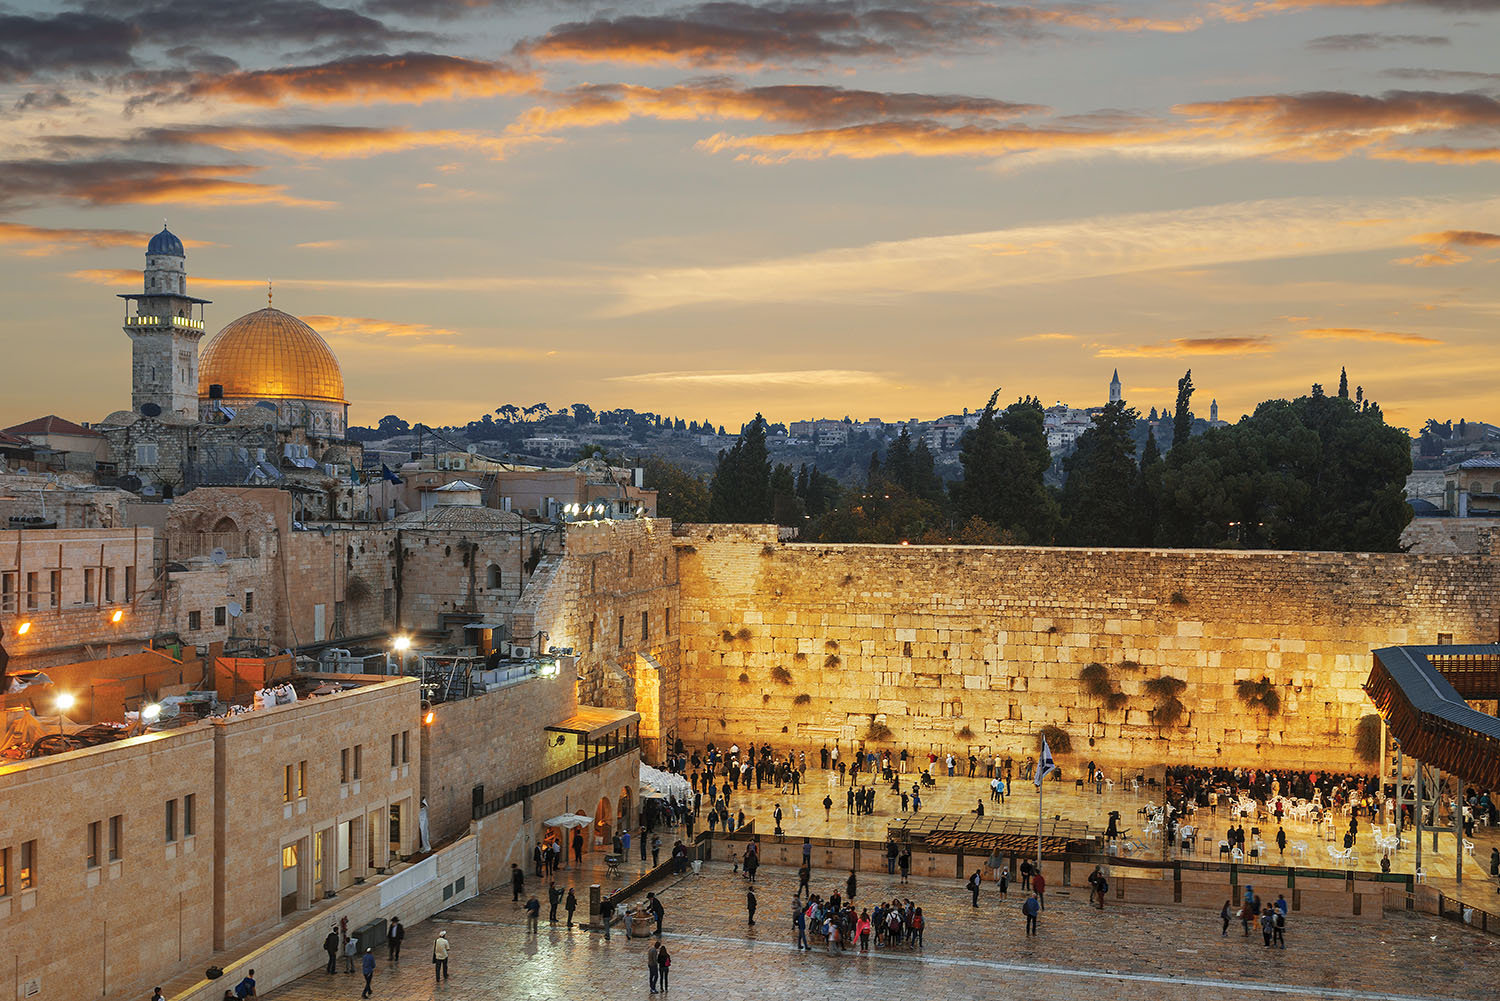 Wailing Wall - Dome of the Rock Travel Jigsaw Puzzle